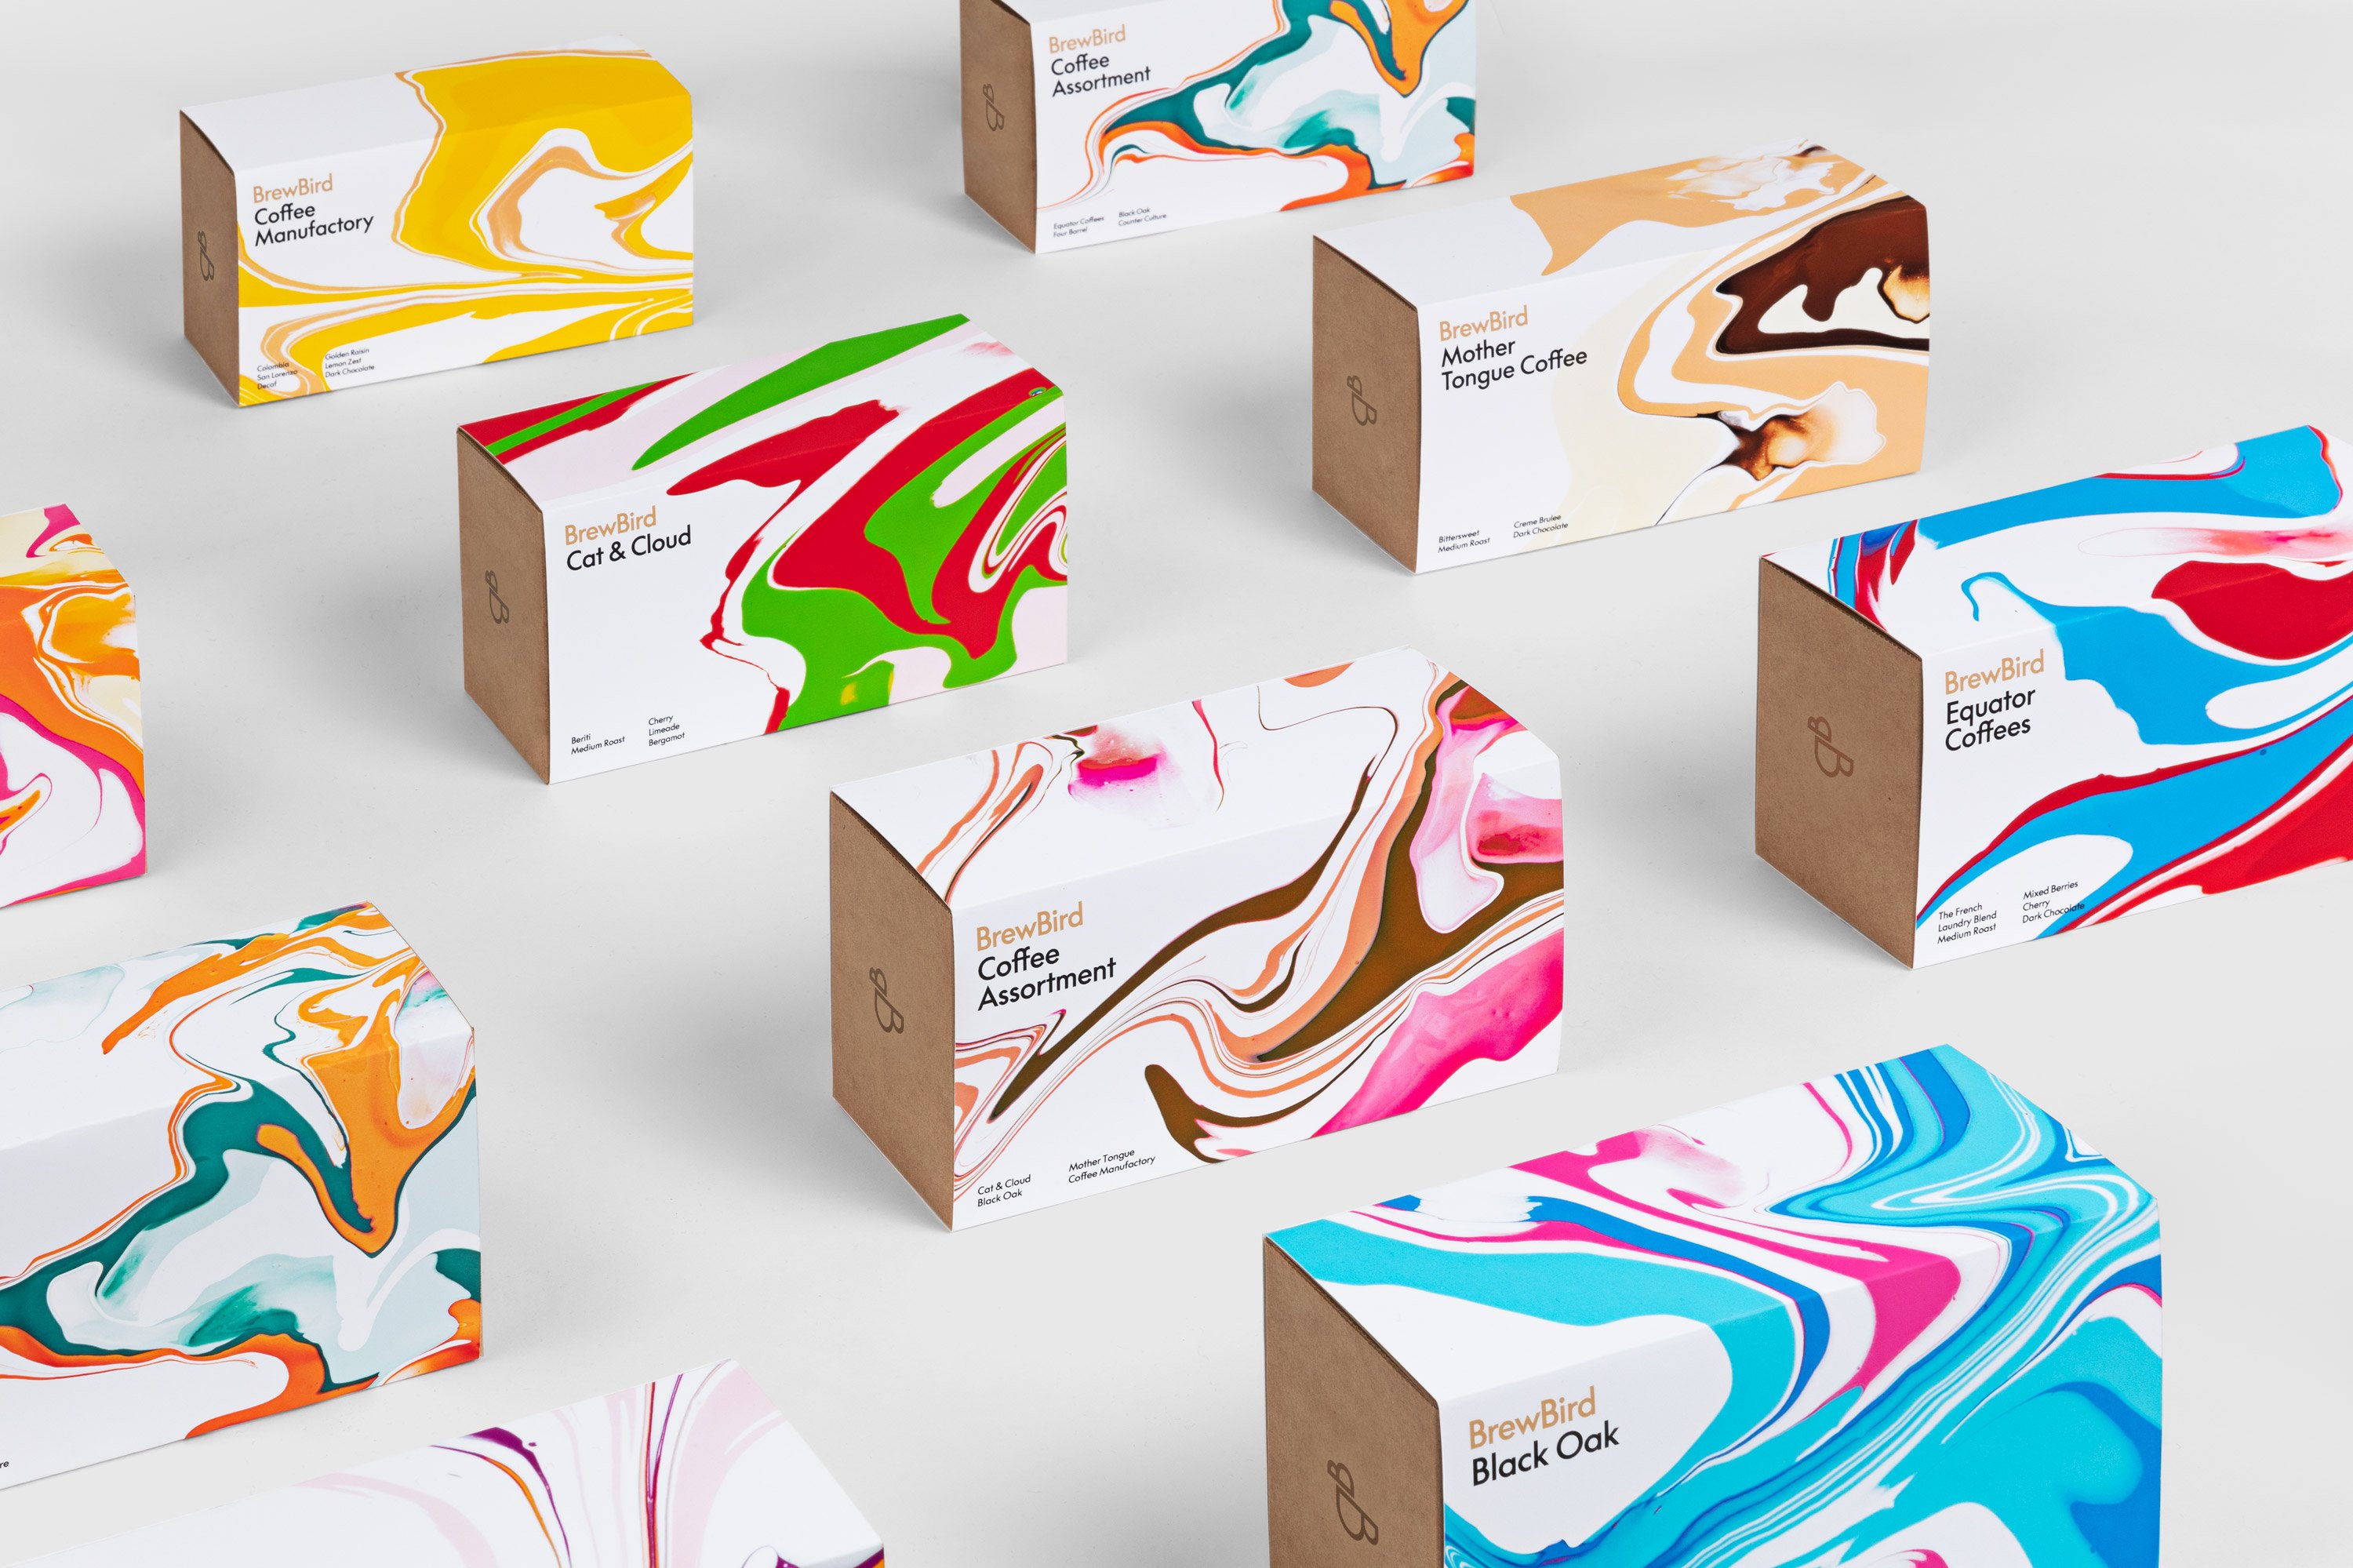 Kraft card packaging design with colourful sleeve for San Francisco coffee pod business BrewBird designed by Mucho